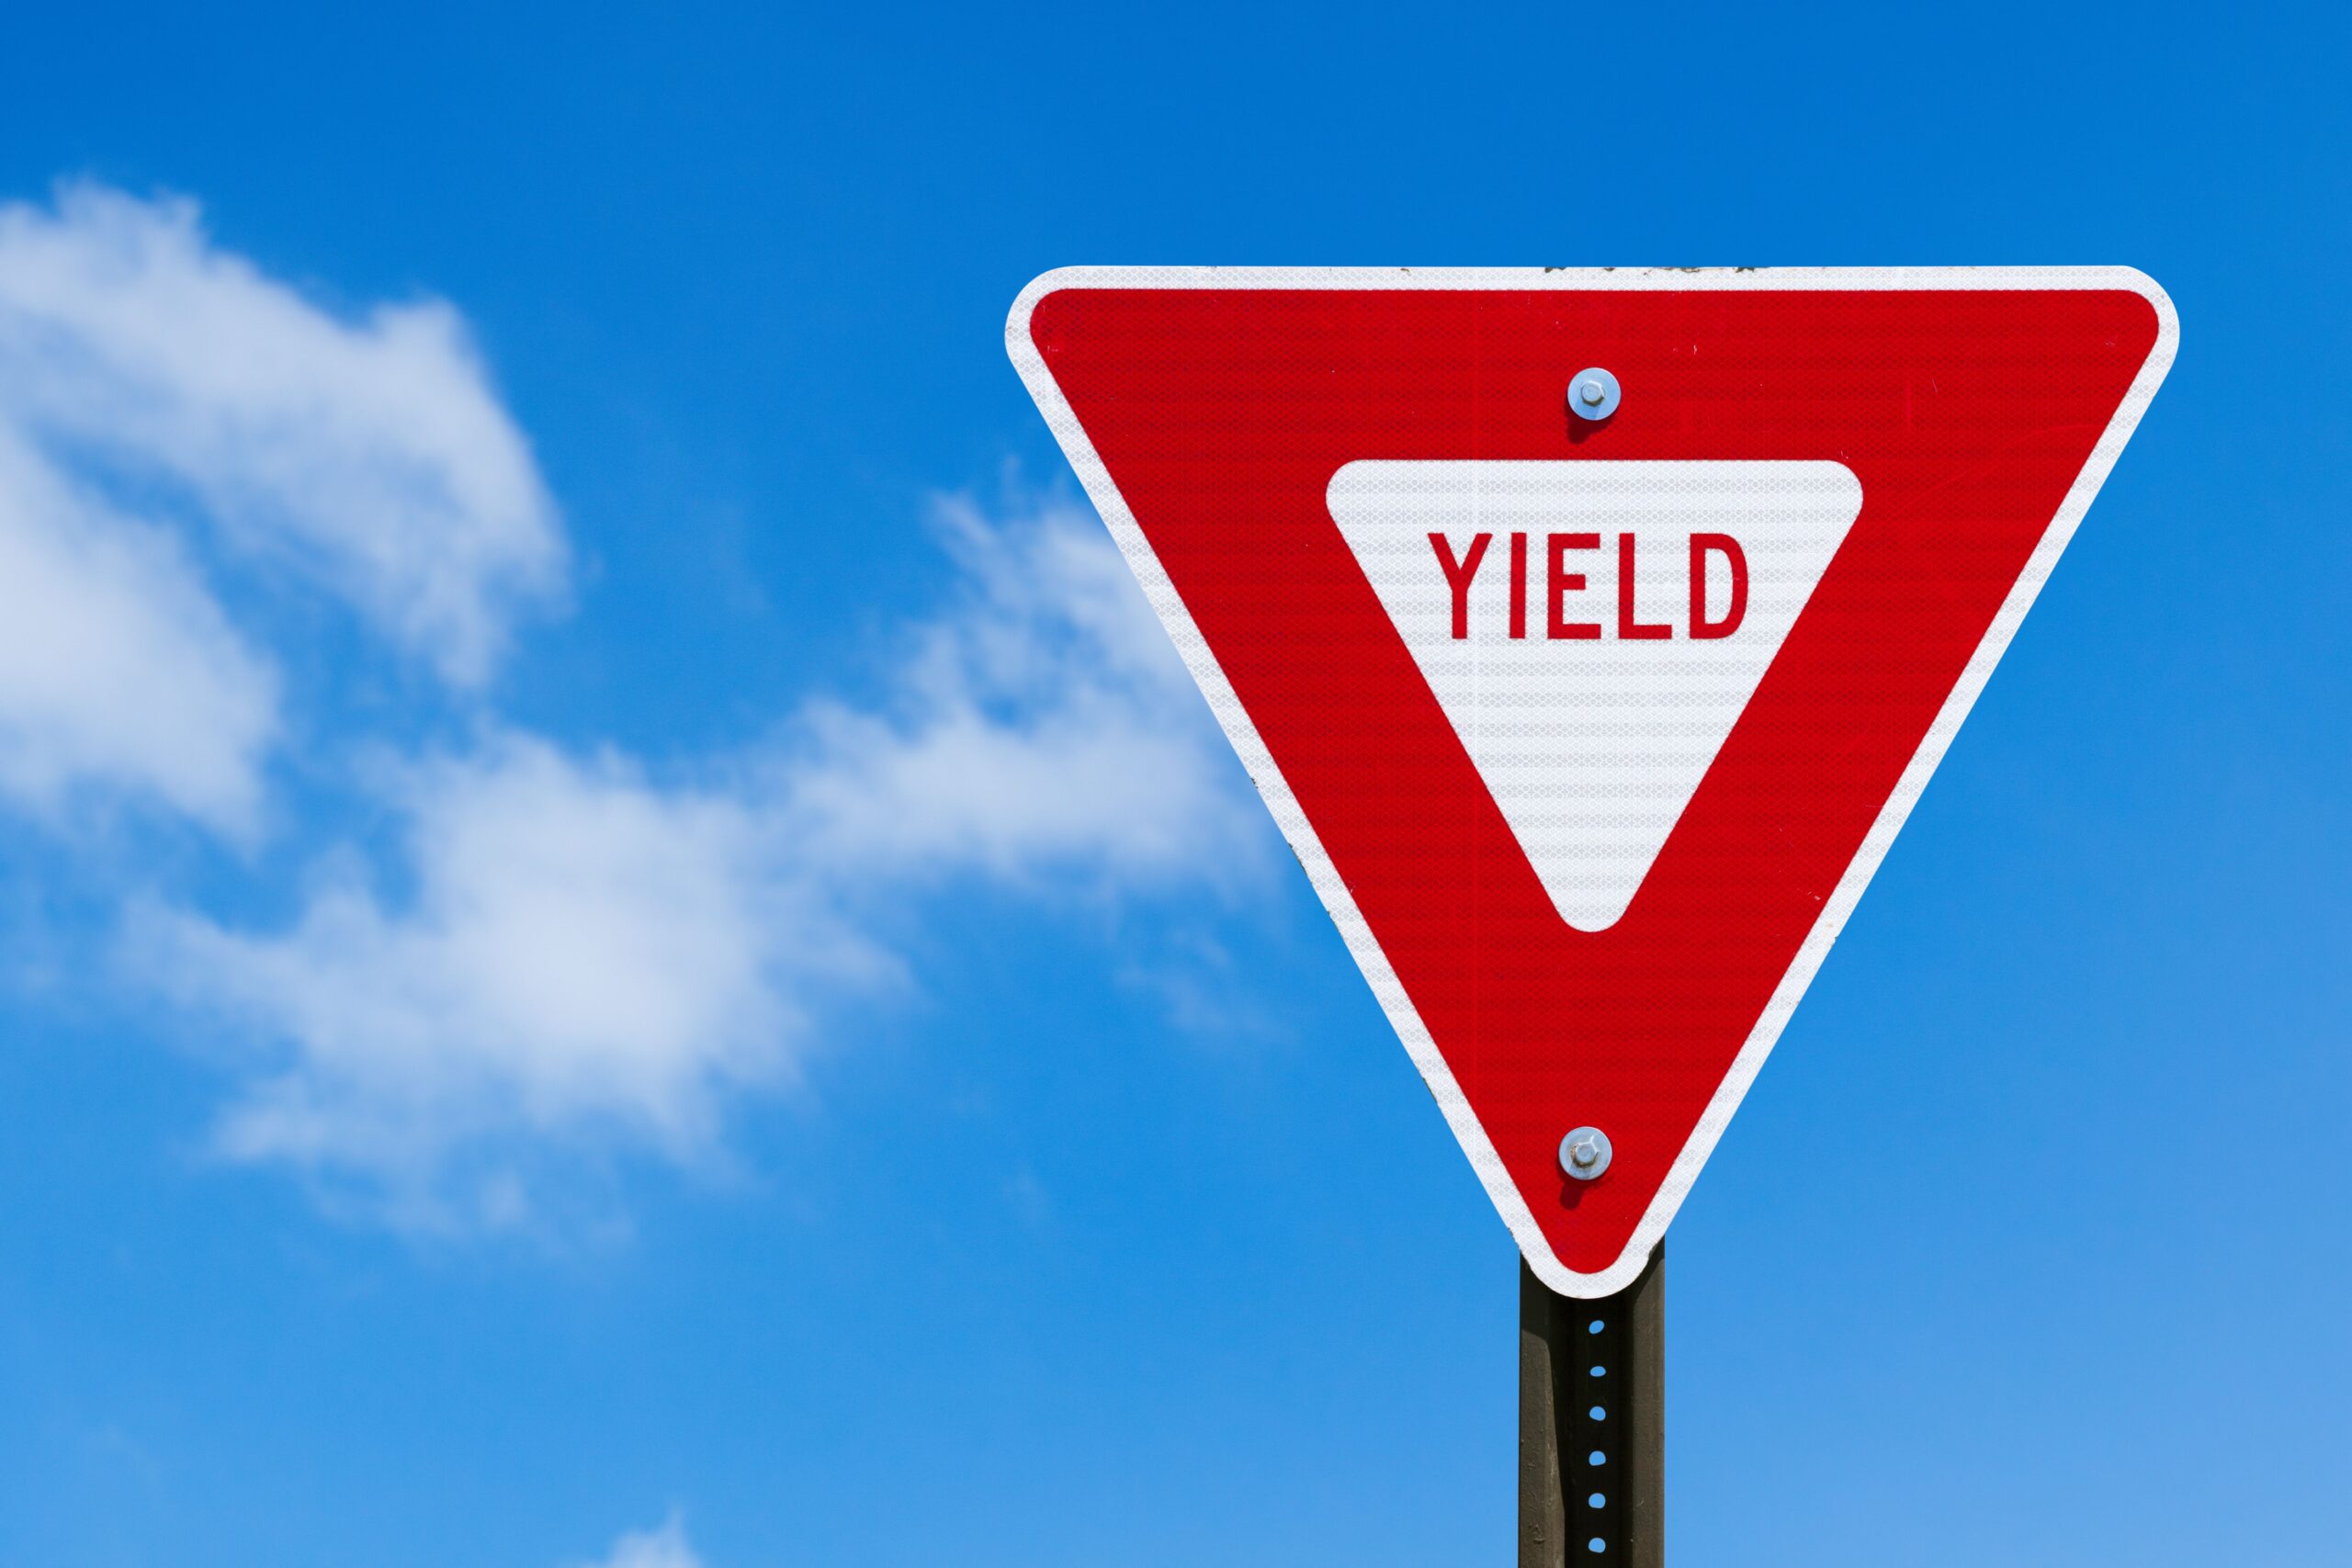 yield the right of way